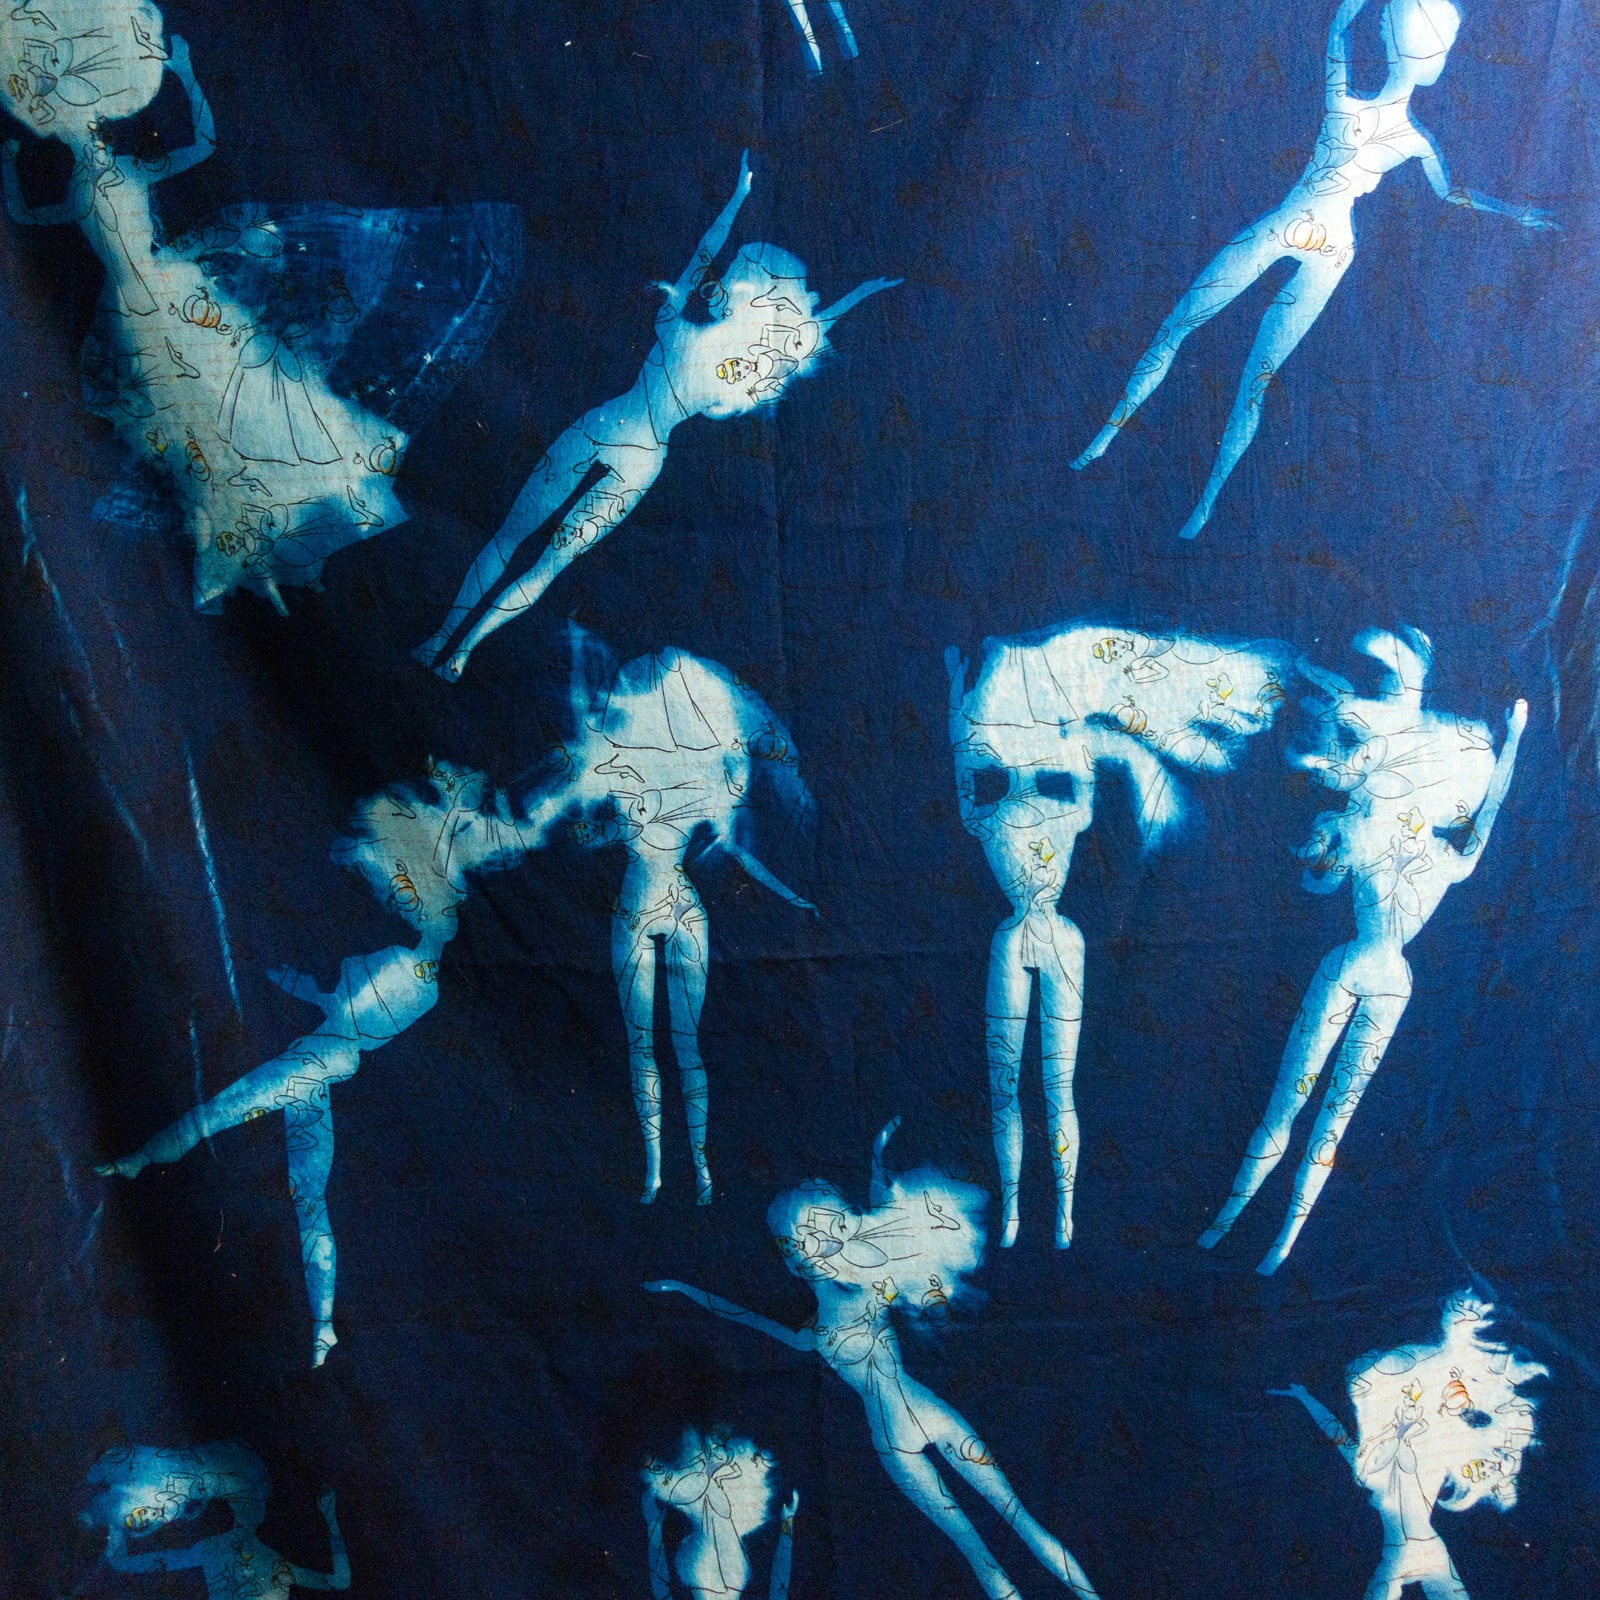 Blue fabric with bleached Barbie Doll figures in various falling poses.